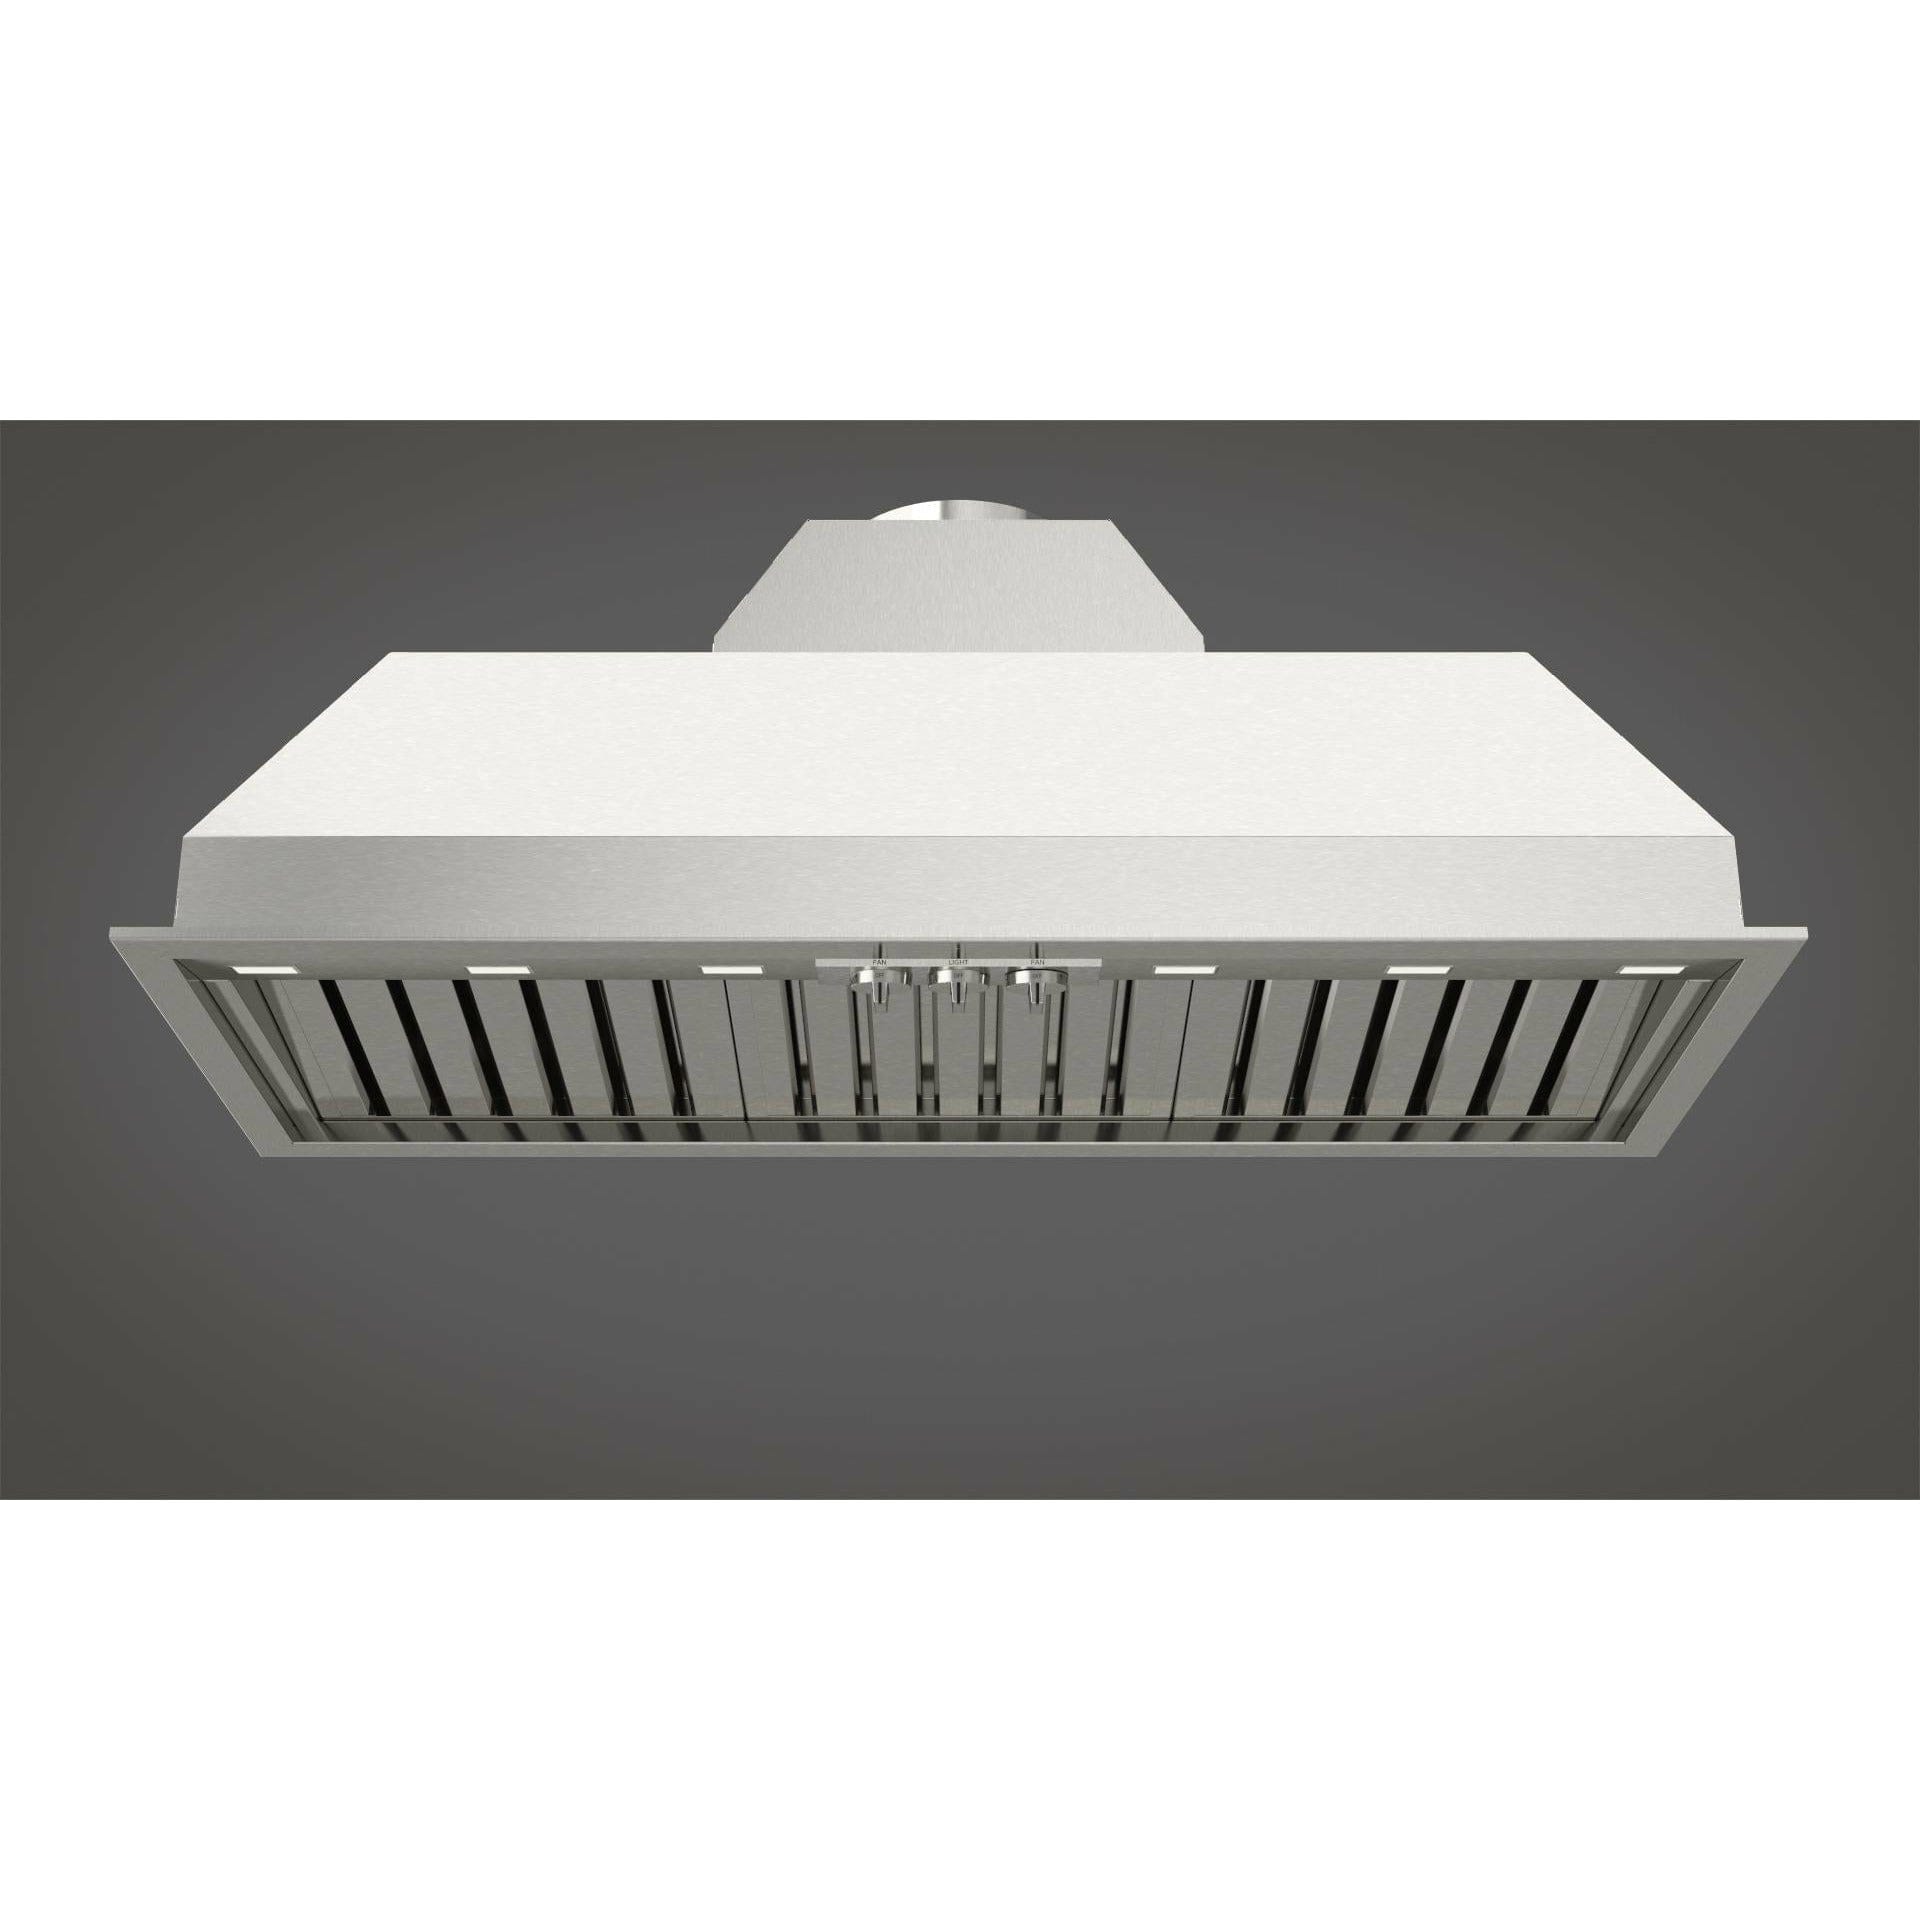 Fulgor Milano 48" Under Cabinet Range Hood with 4 + 4-Speed/1000 CFM Blower, Stainless Steel - F6BP46DS1 Hoods F6BP46DS1 Luxury Appliances Direct